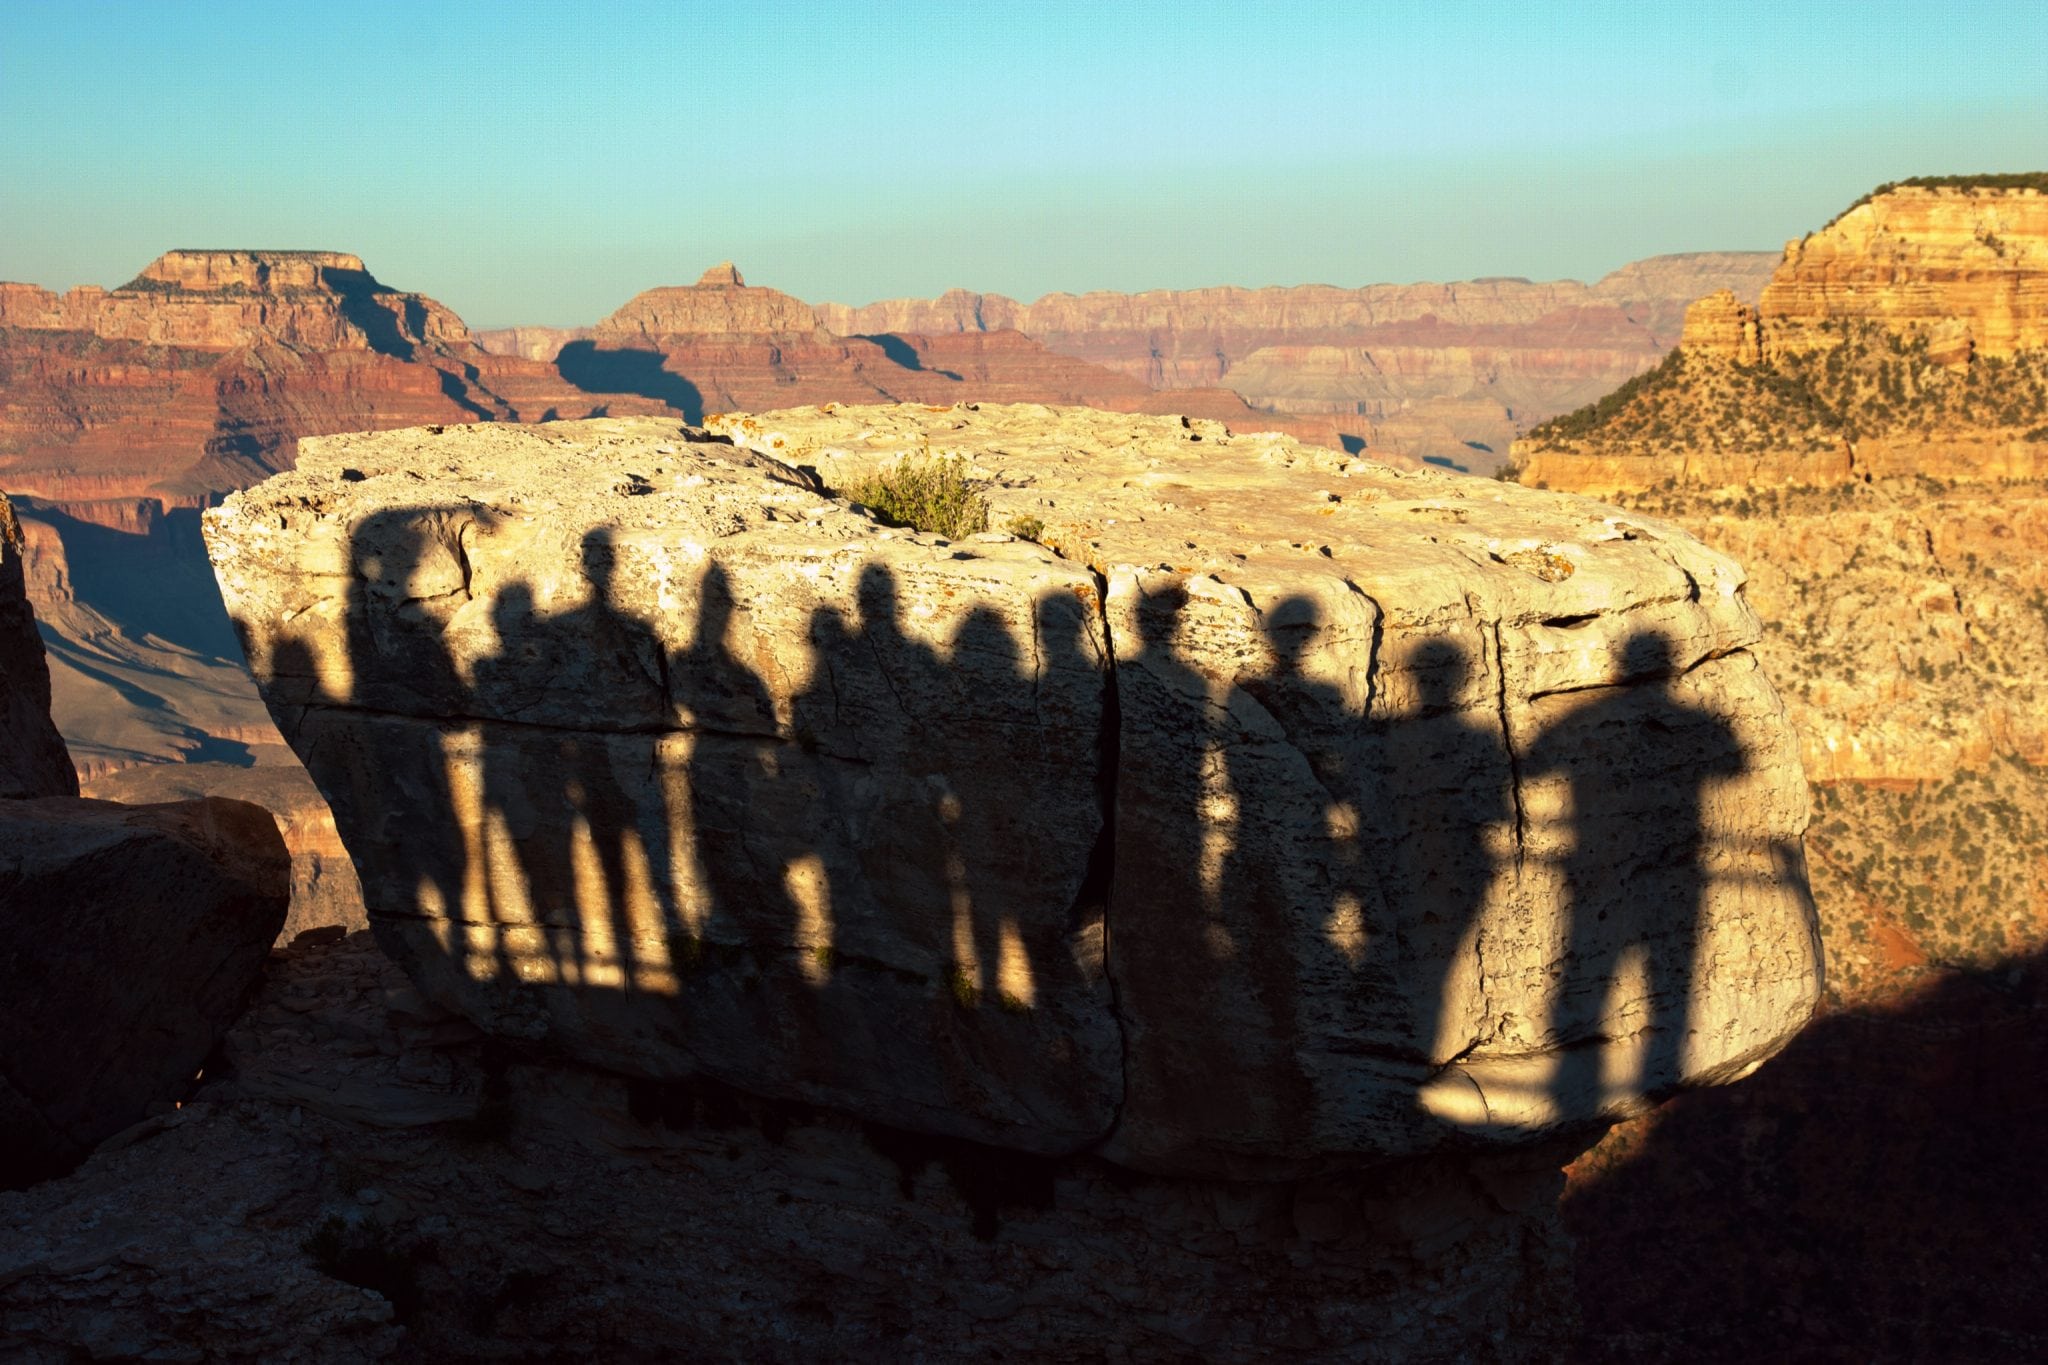 Tourists at the Grand Canyon.